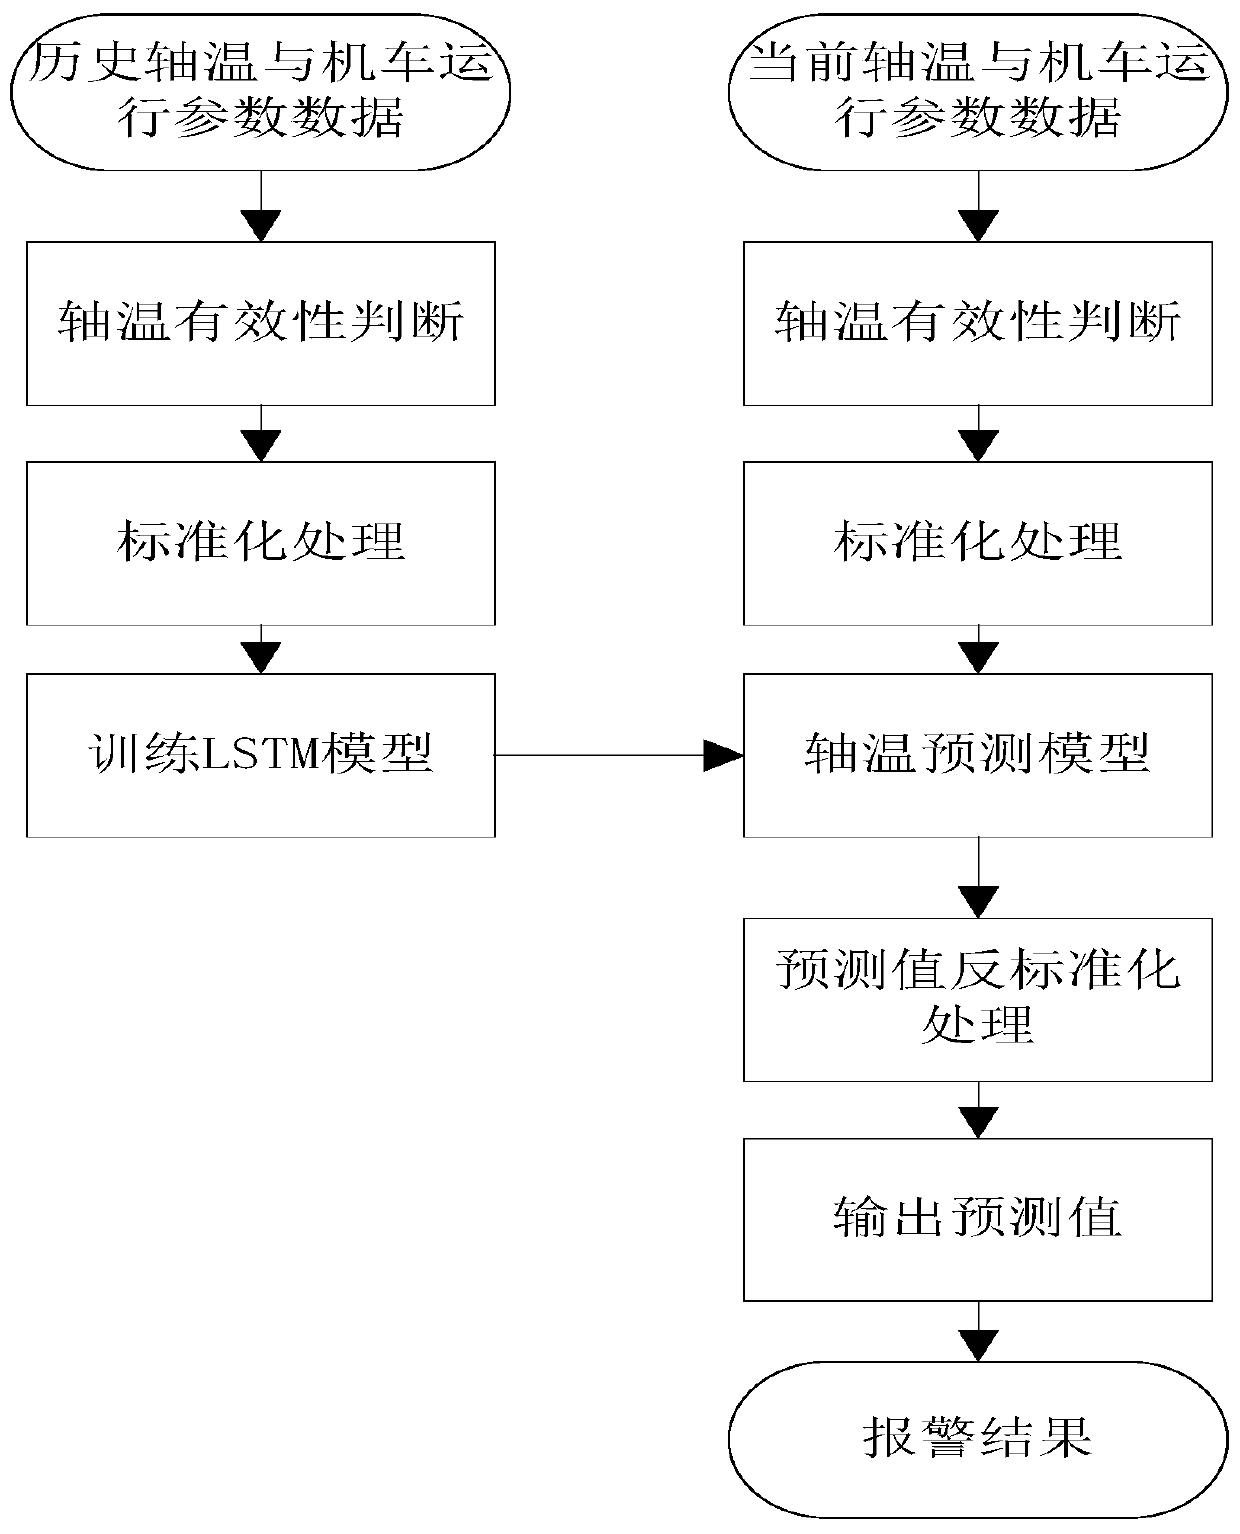 Bearing temperature prediction and alarm diagnosis method based on LSTM model